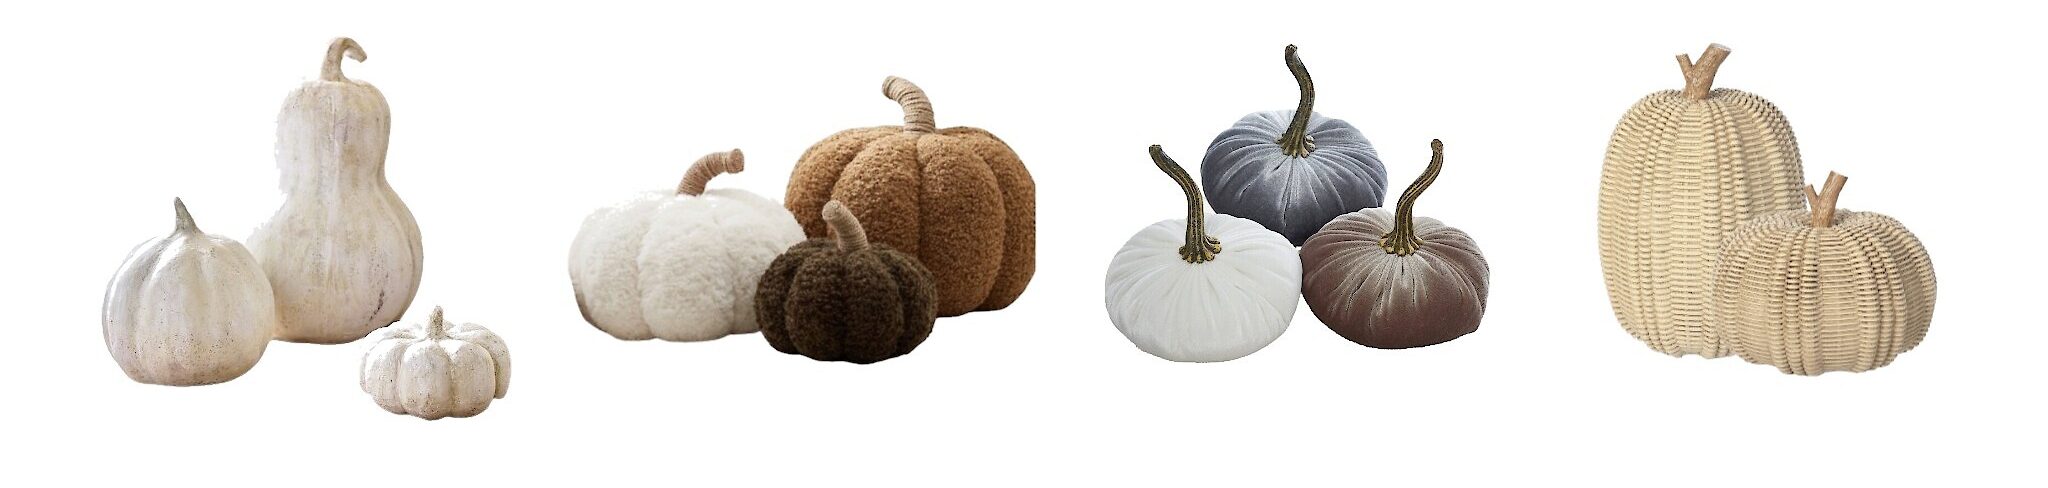 Decorating with Fall pumpkins